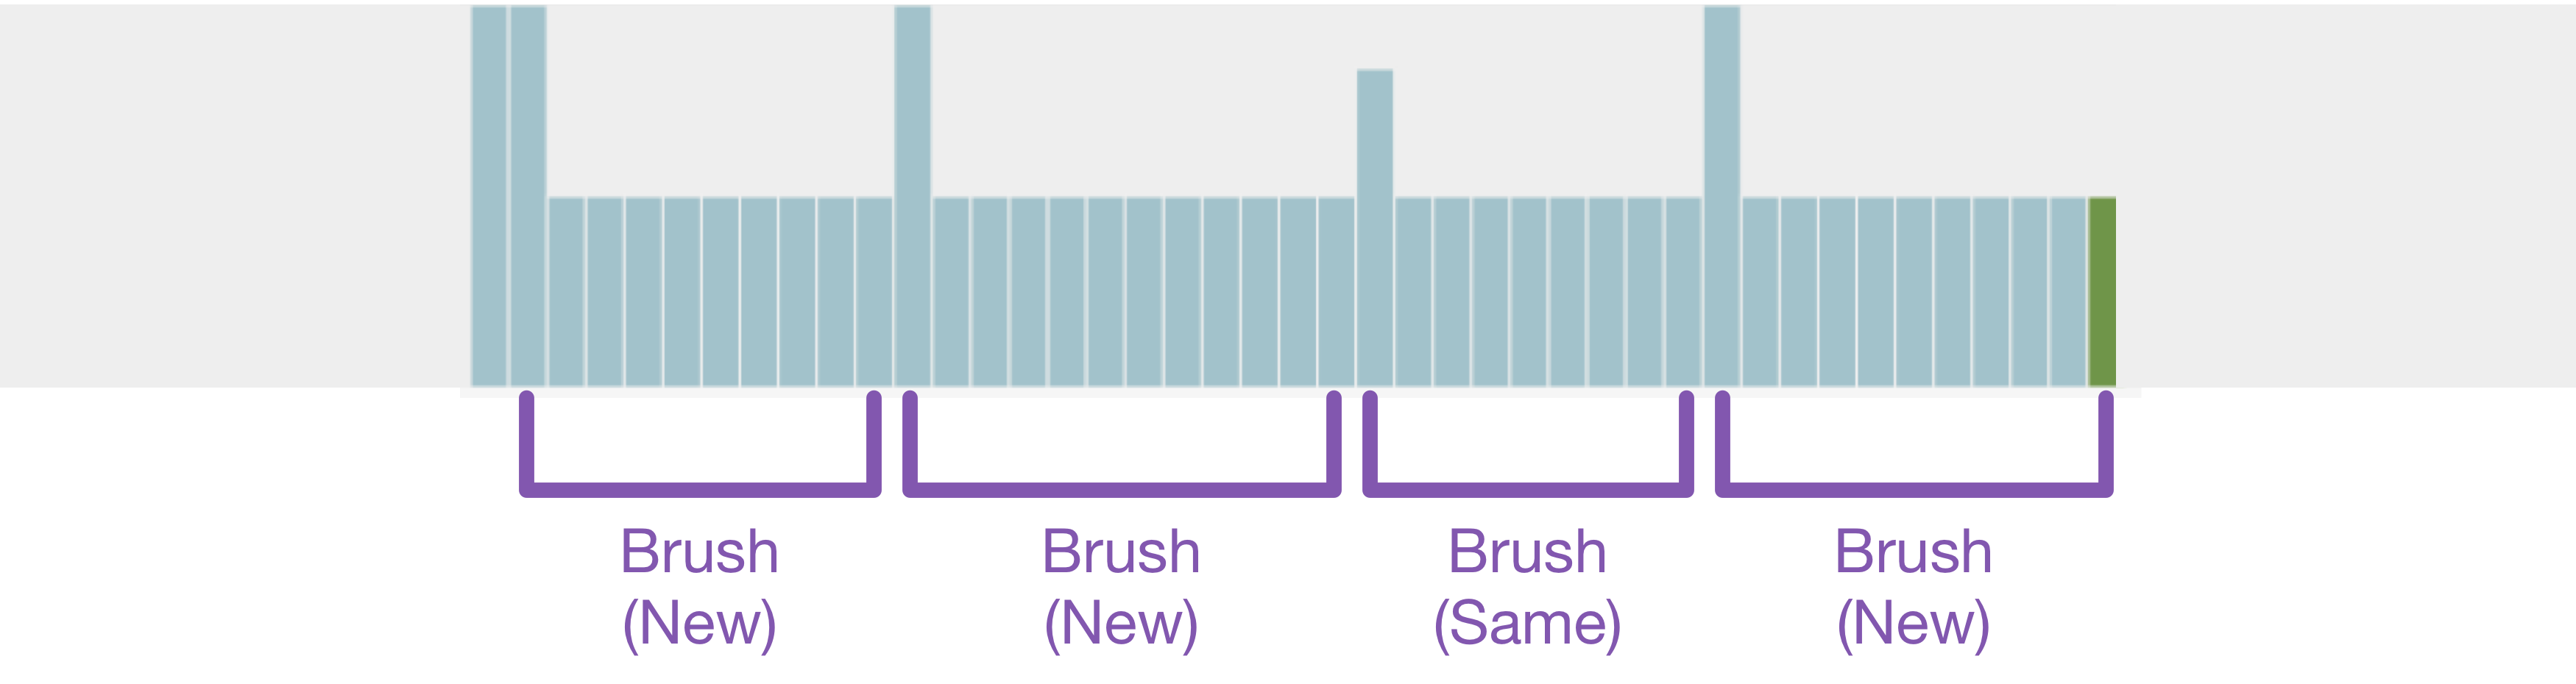 Overview - Brushing